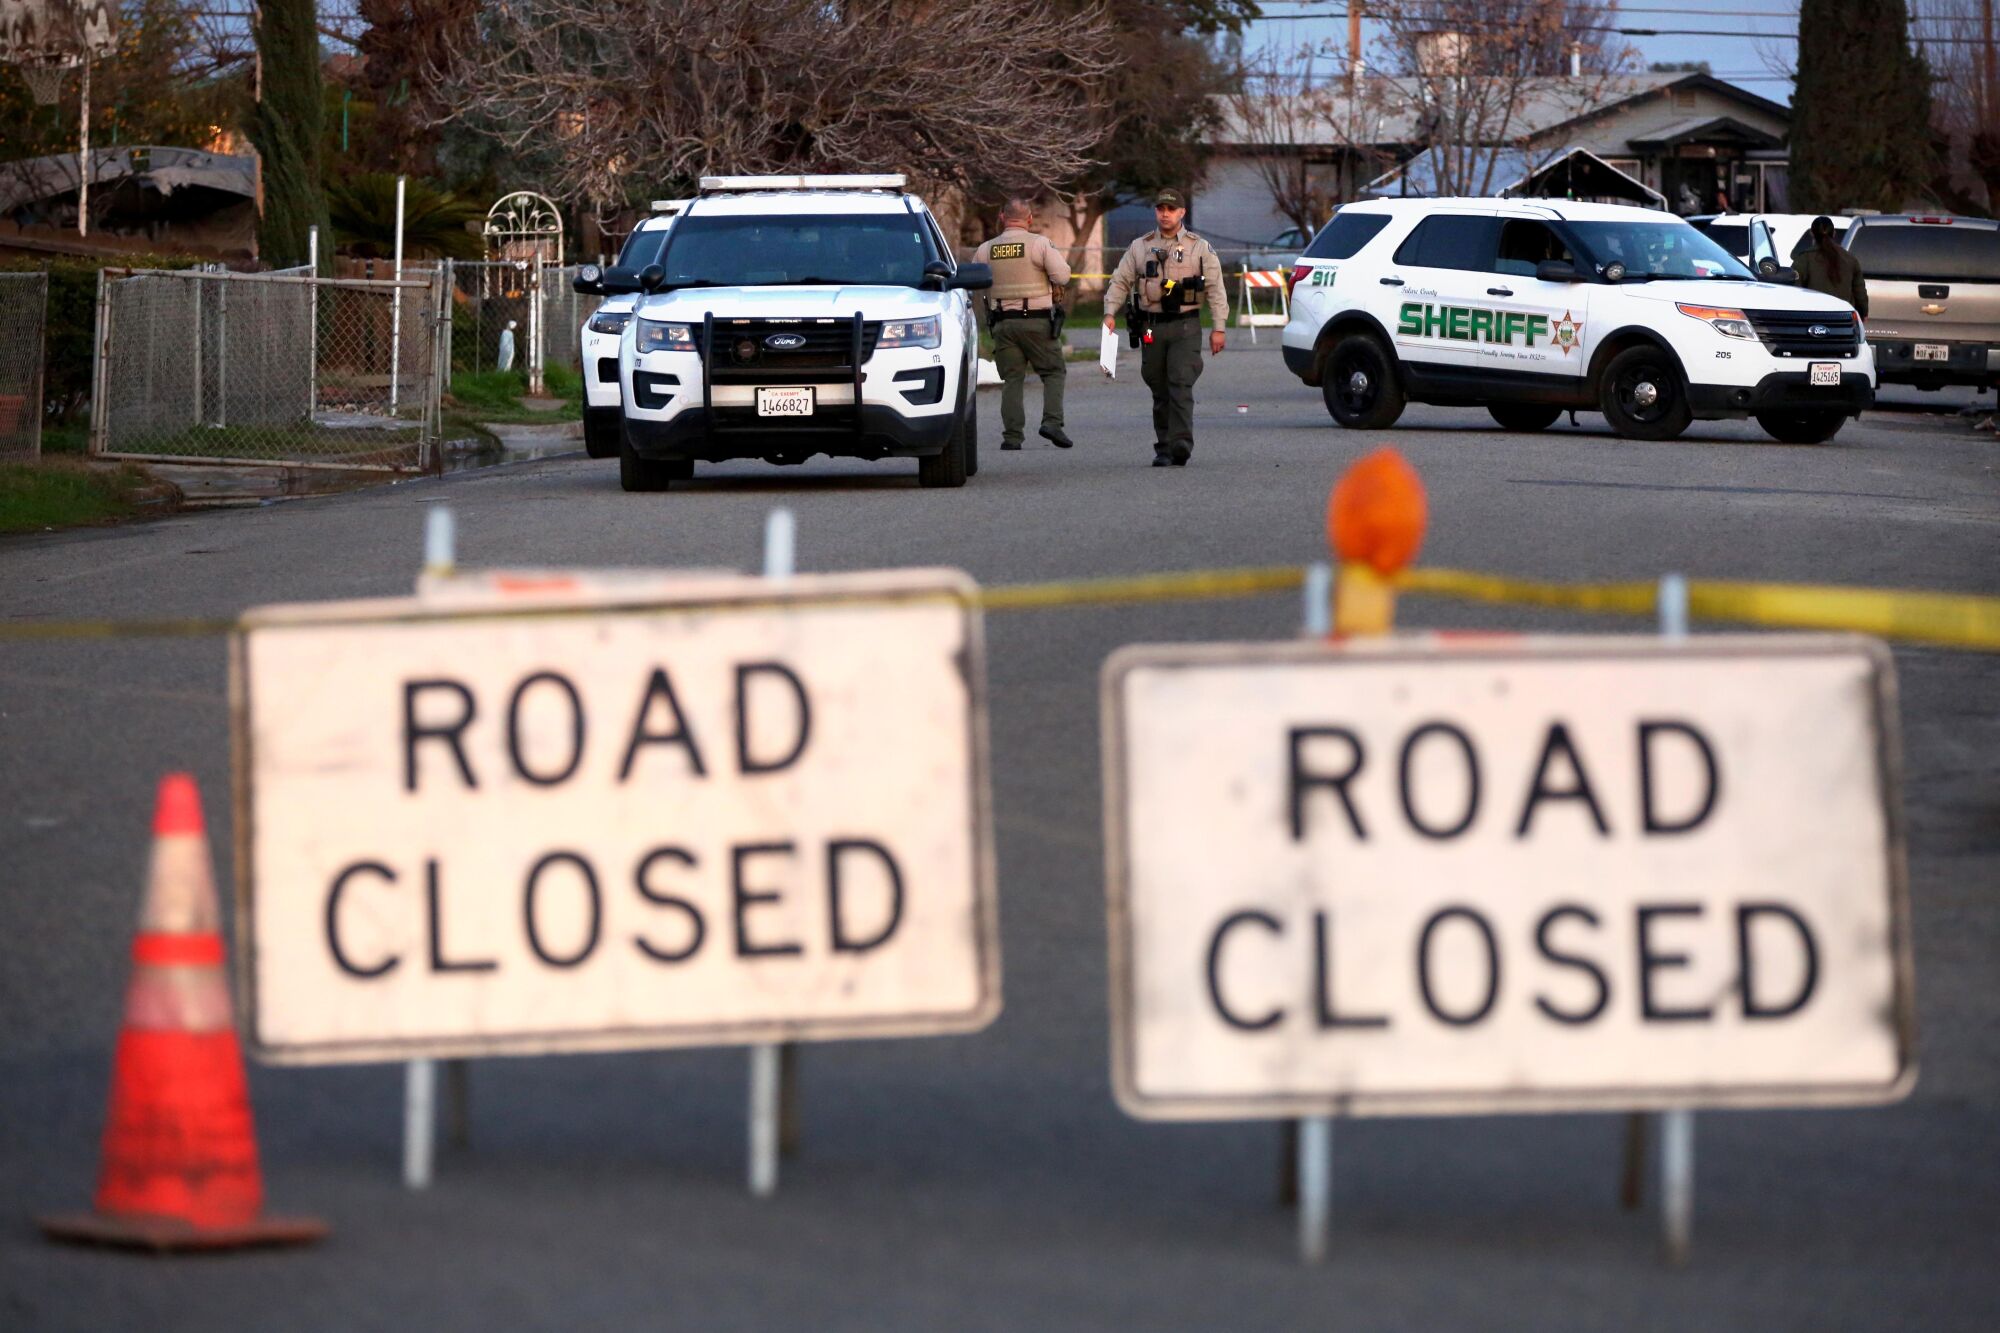 Deputies standing beside department vehicles on a residential street with "Road Closed" signs